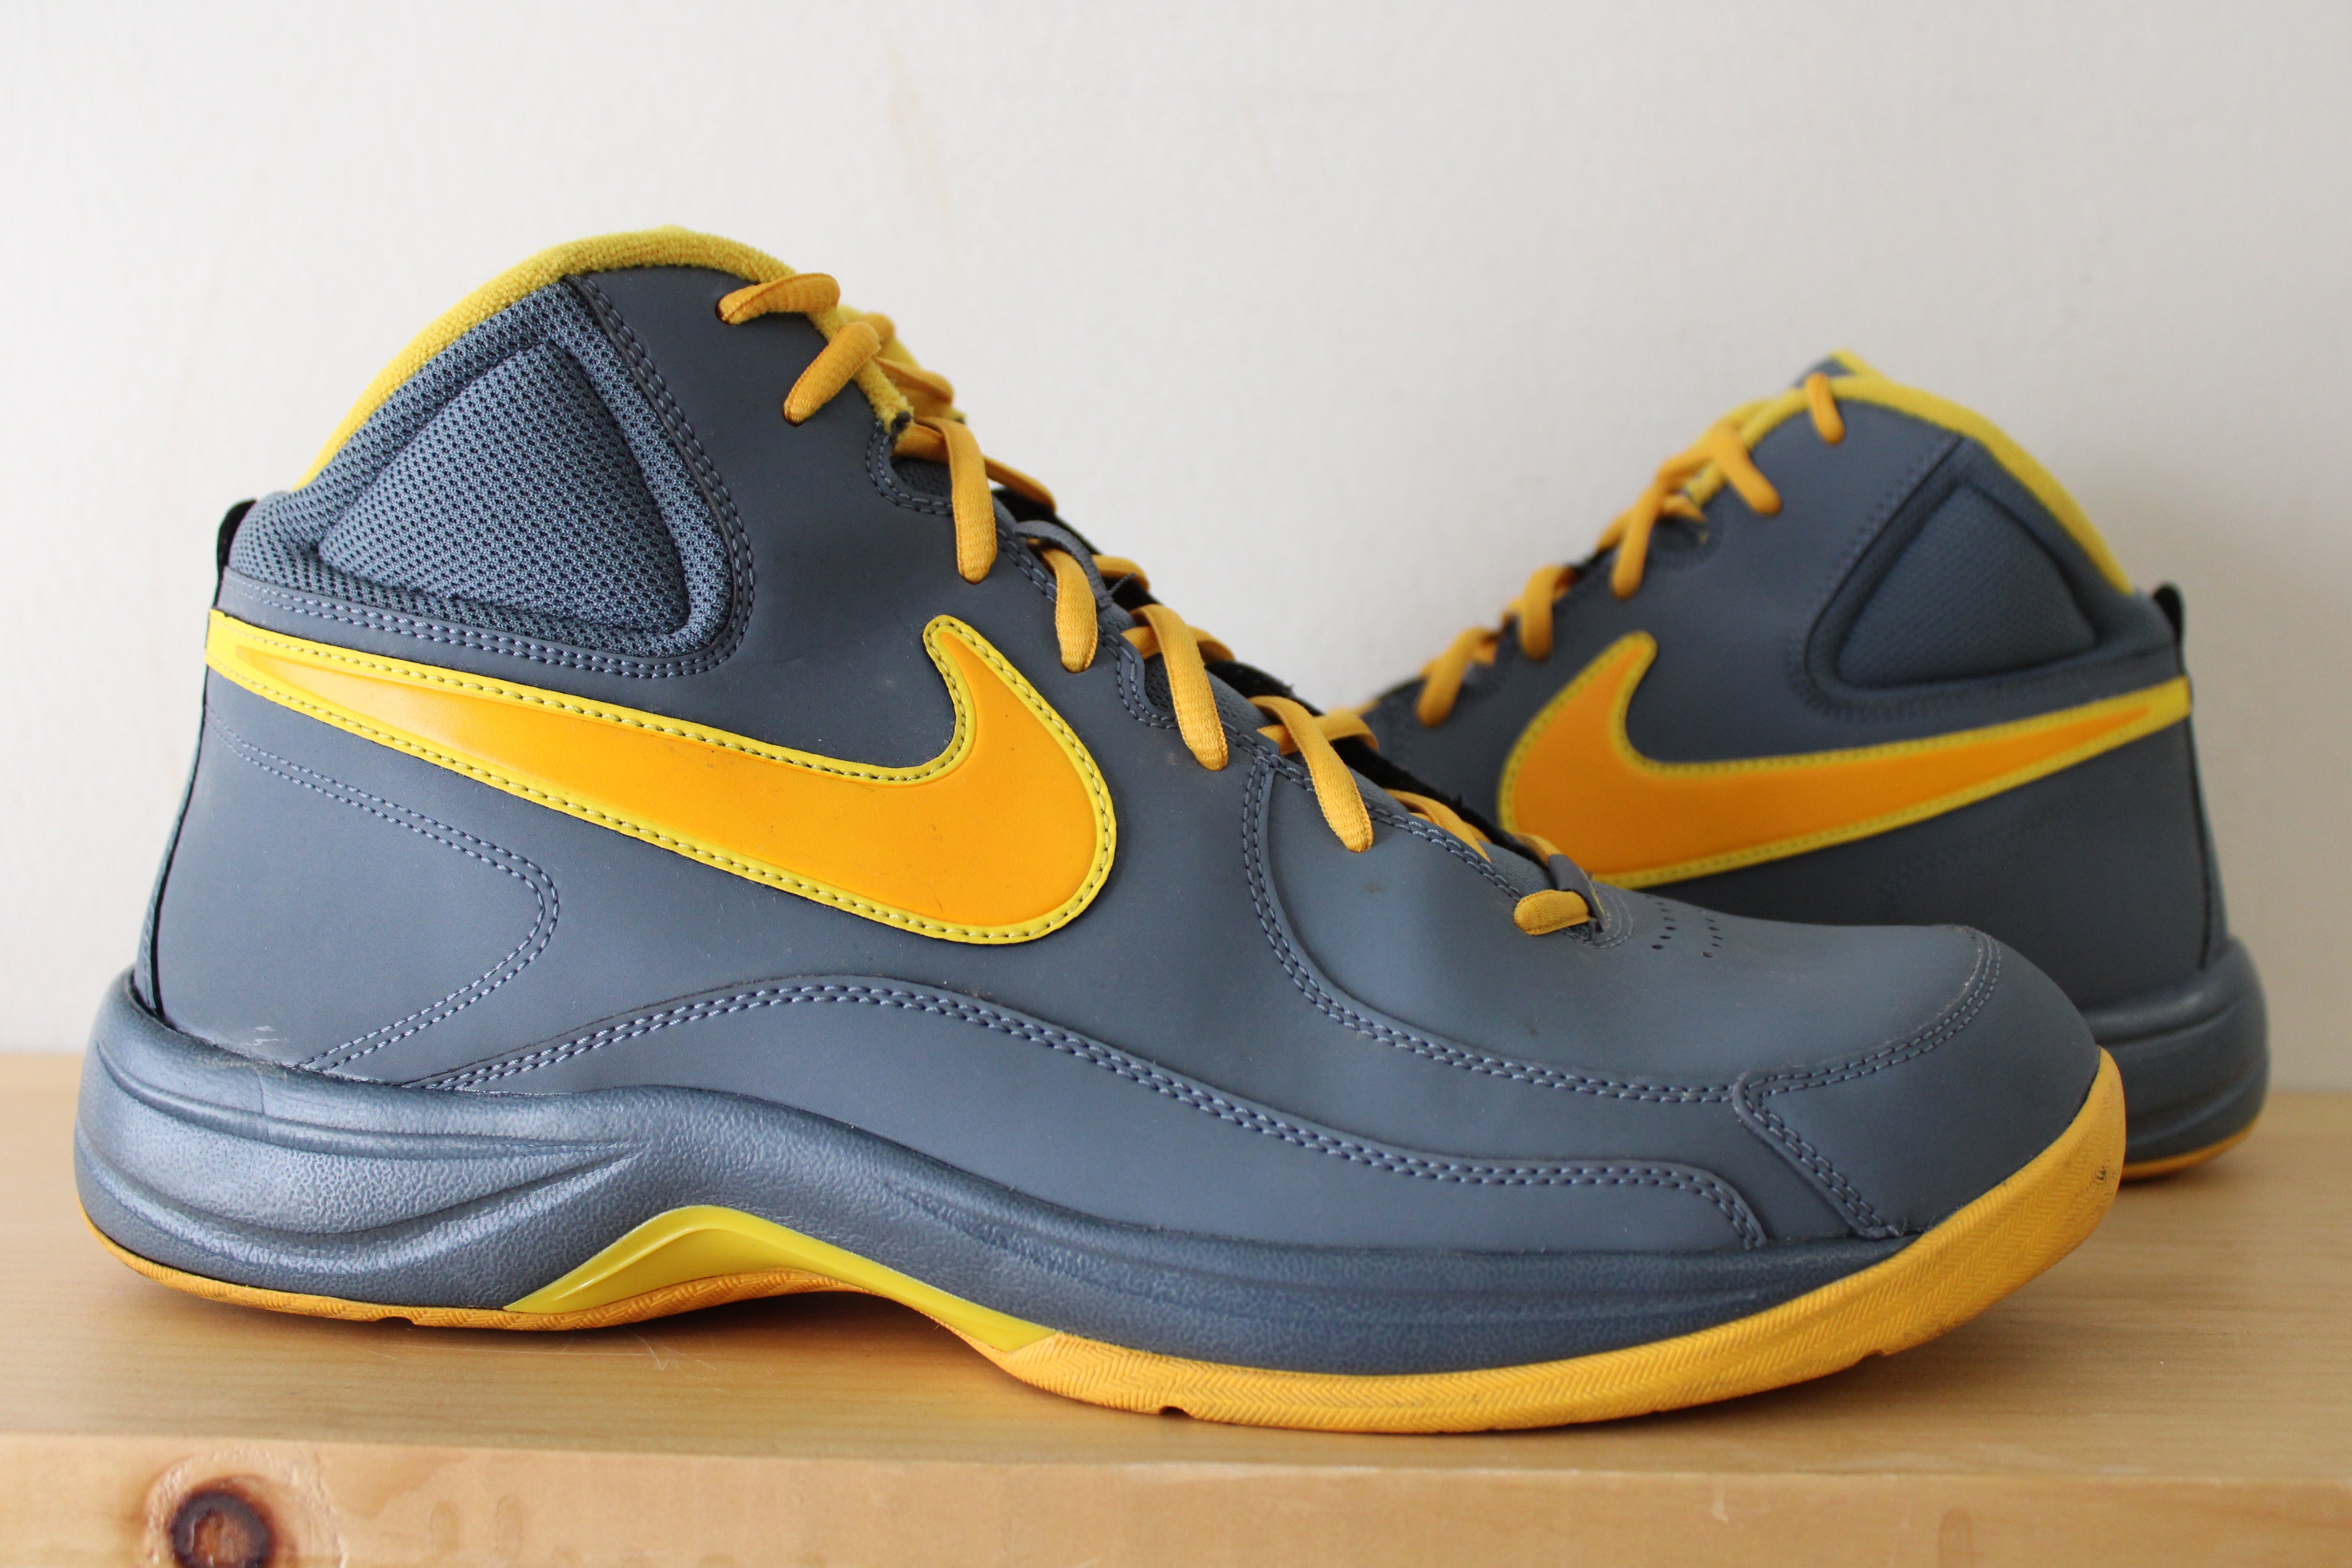 Nike The Overplay Grey & Yellow Basketball Sneakers | Men's 12.5